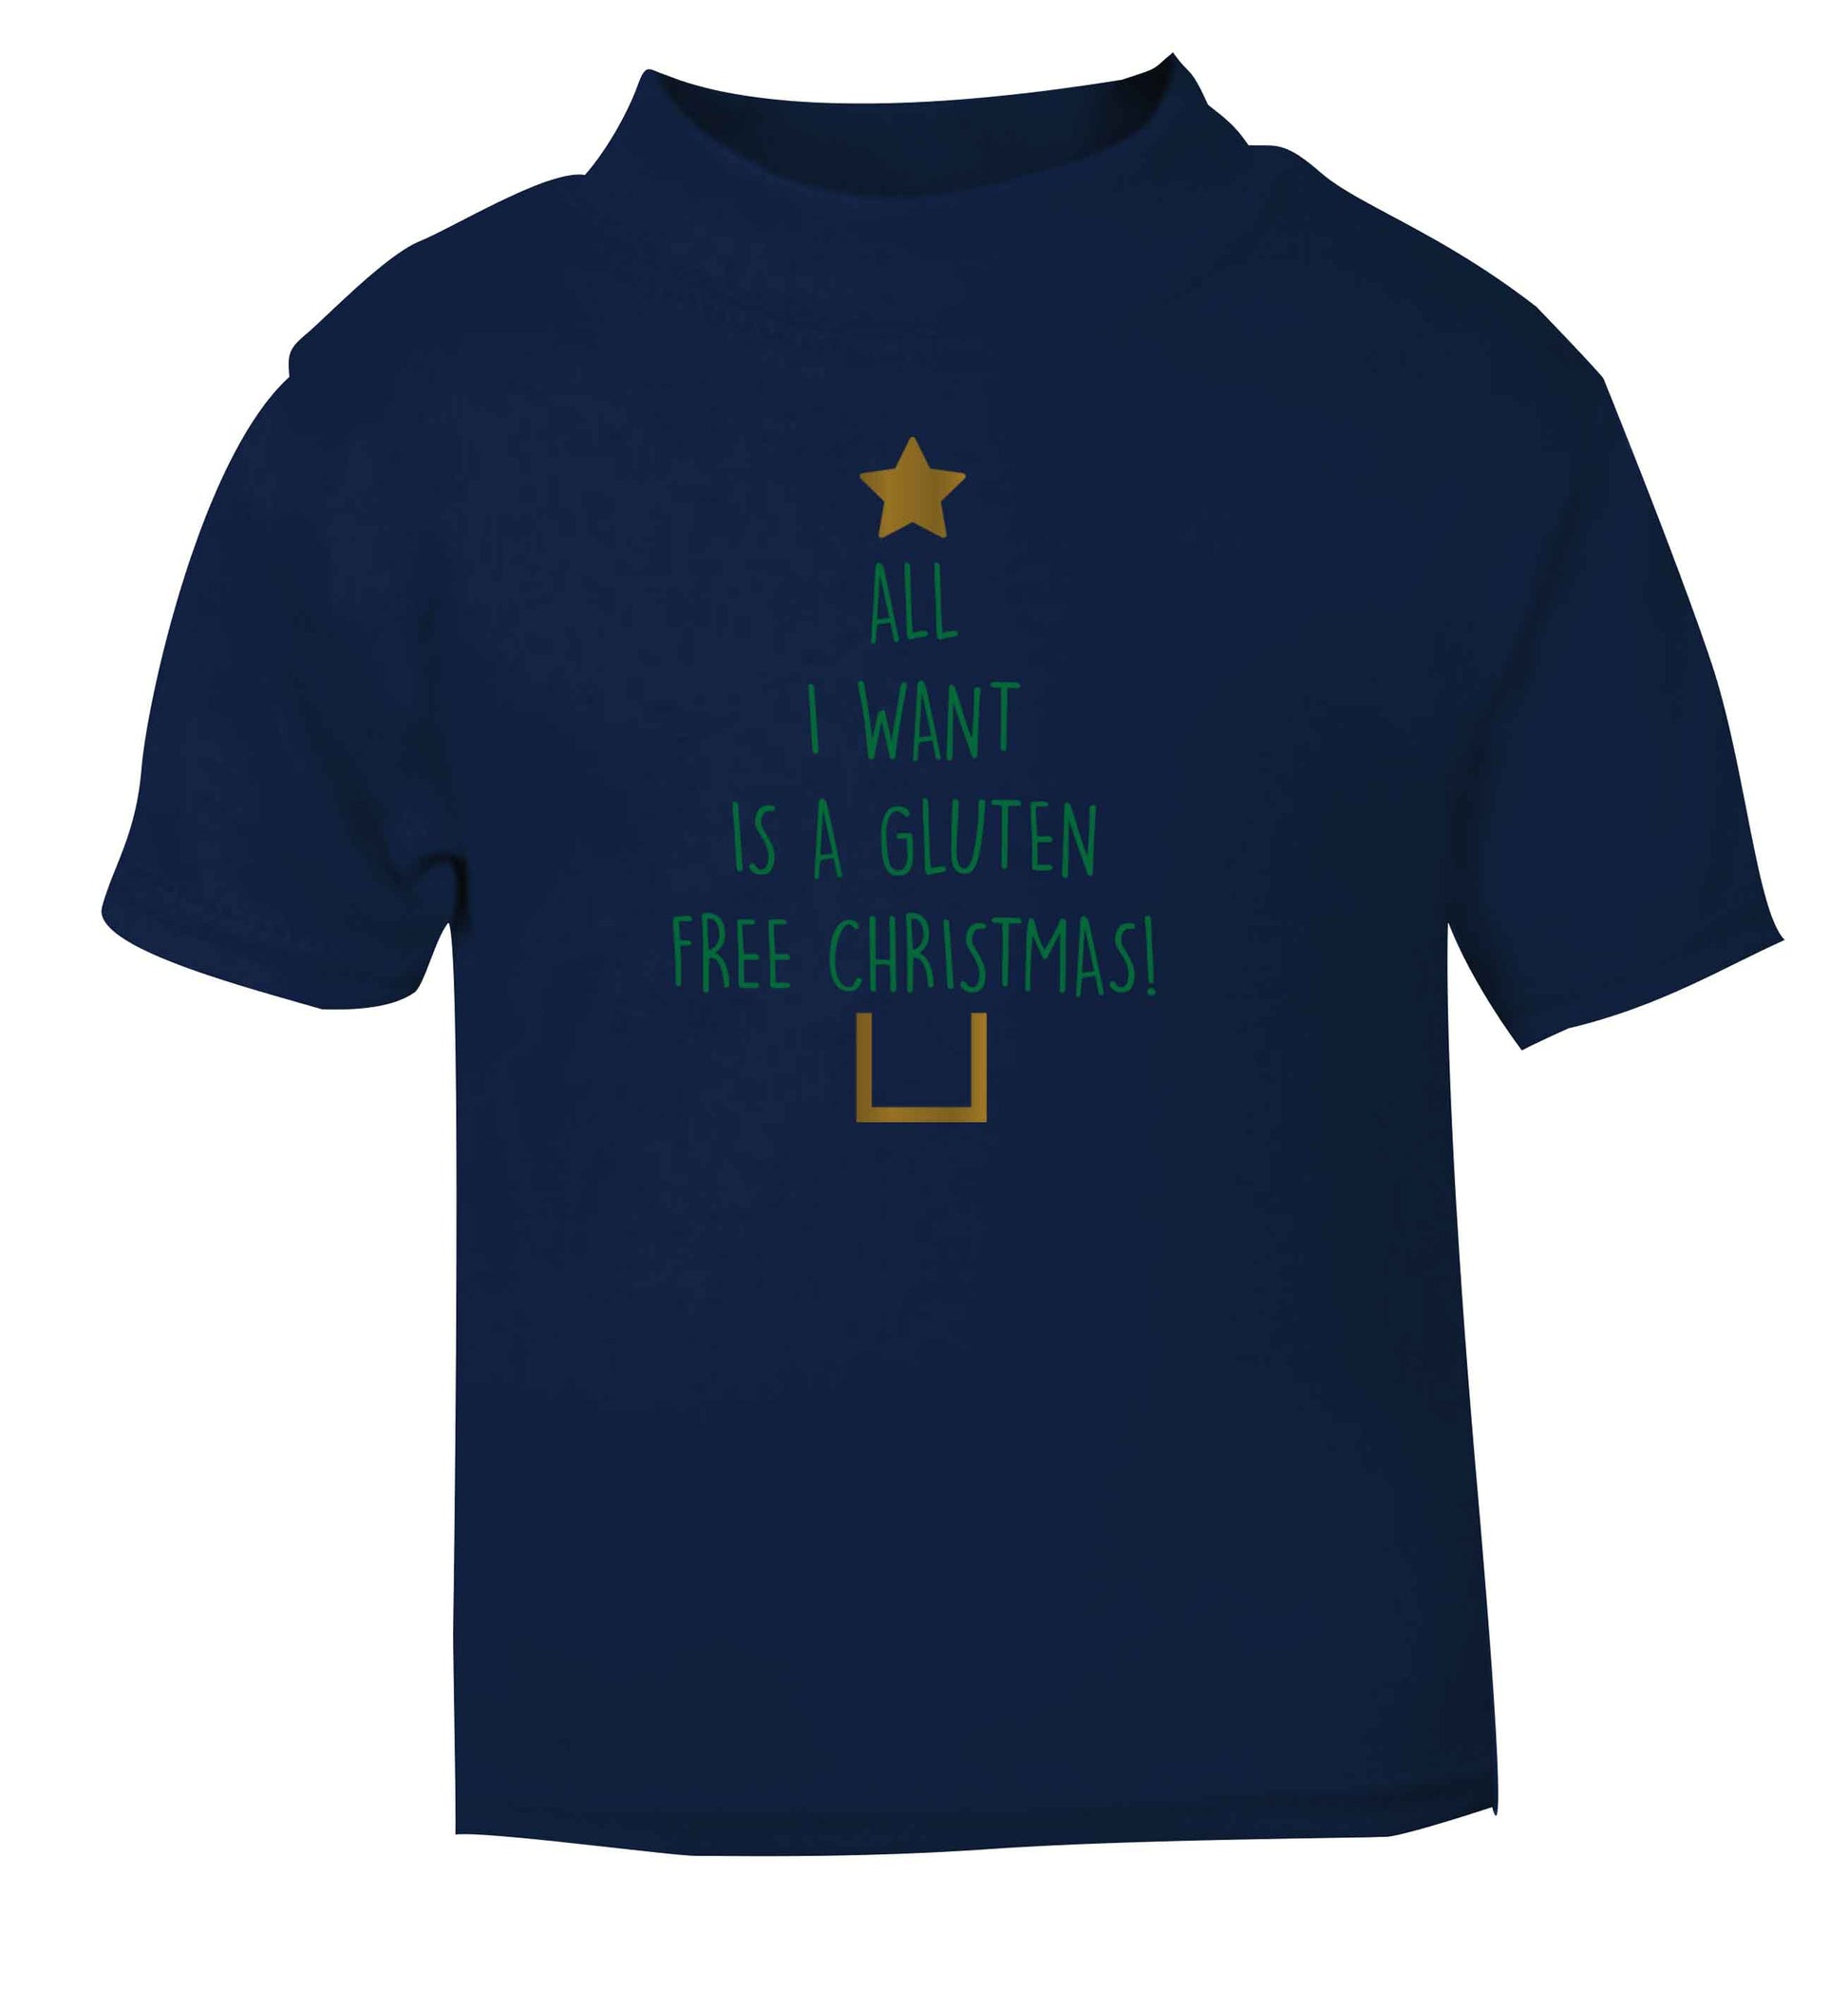 All I want is a gluten free Christmas navy Baby Toddler Tshirt 2 Years